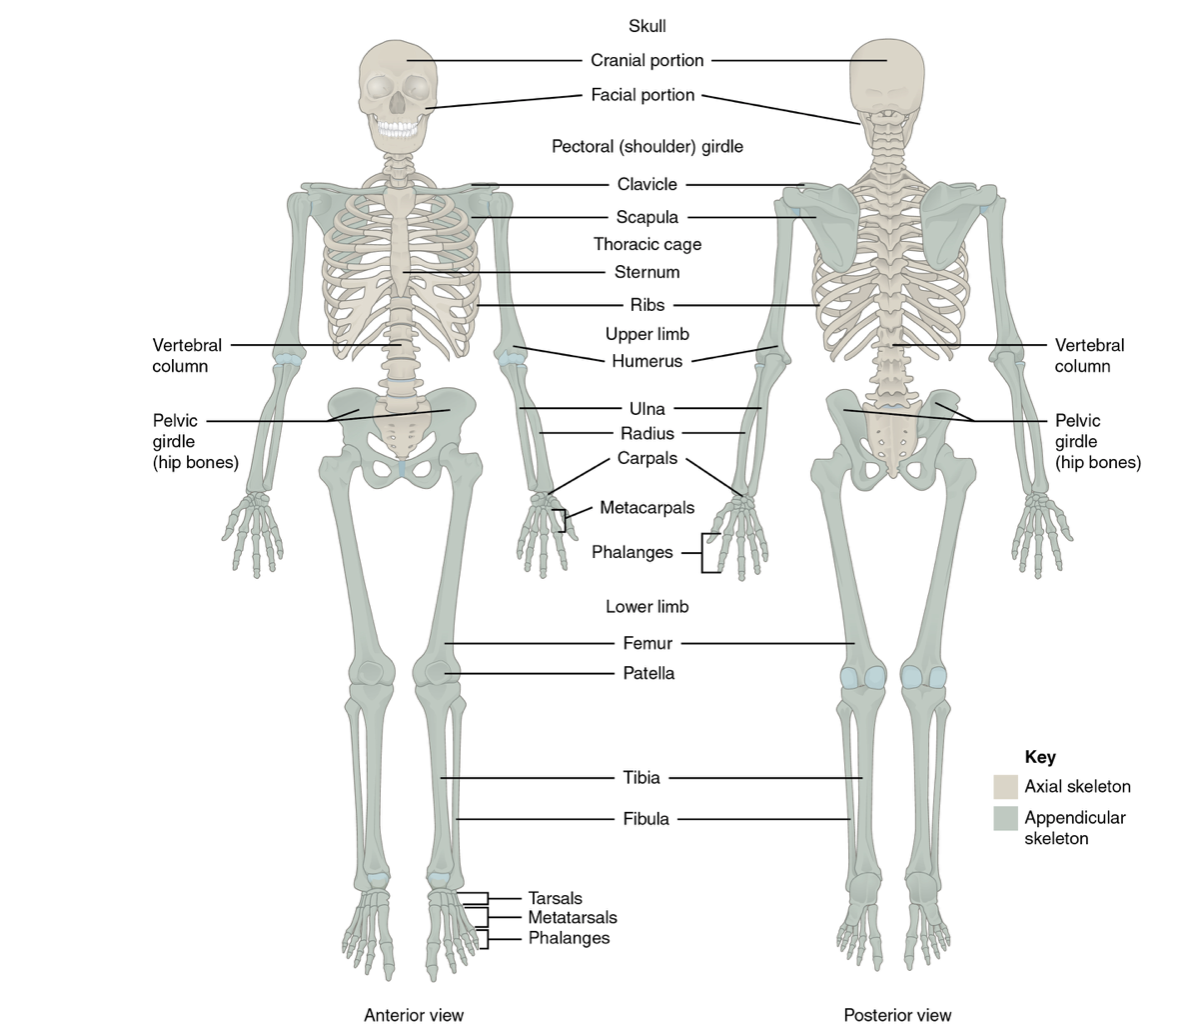 Anterior and posterior view of skeletal system, more details in the surrounding text and links.